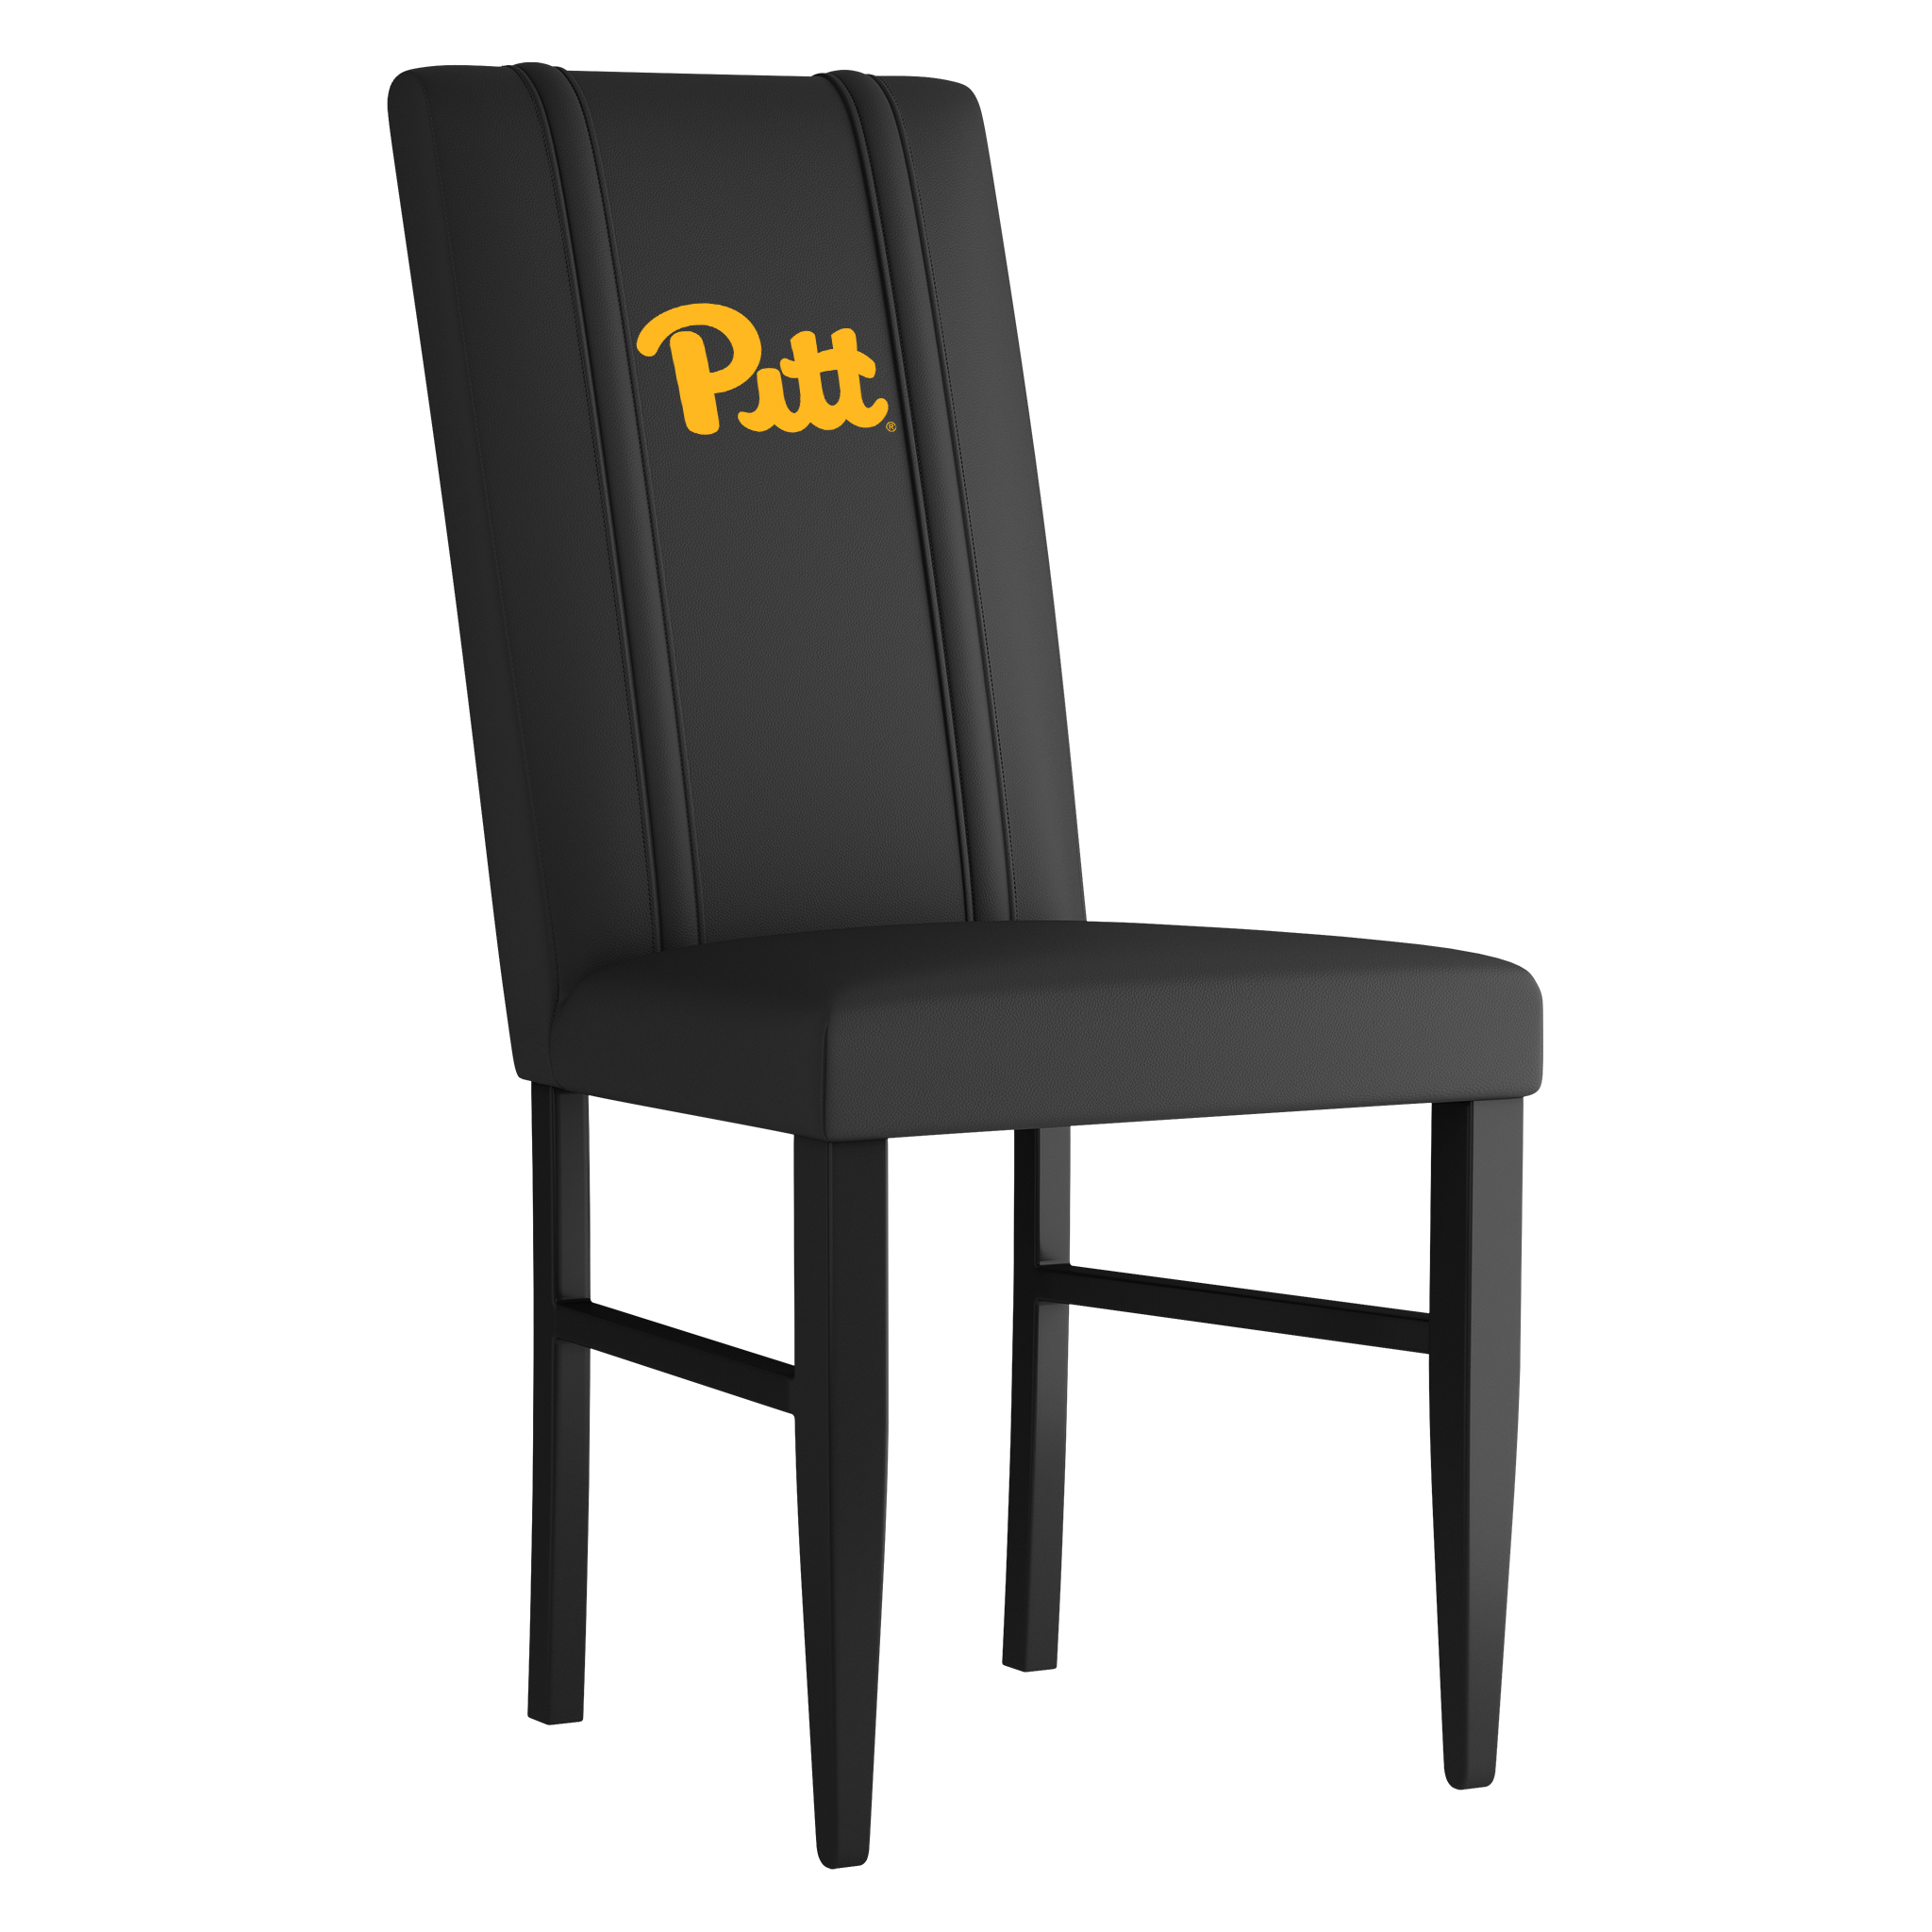 Pittsburgh Panthers Side Chair 2000 With Pittsburgh Panthers Secondary Logo